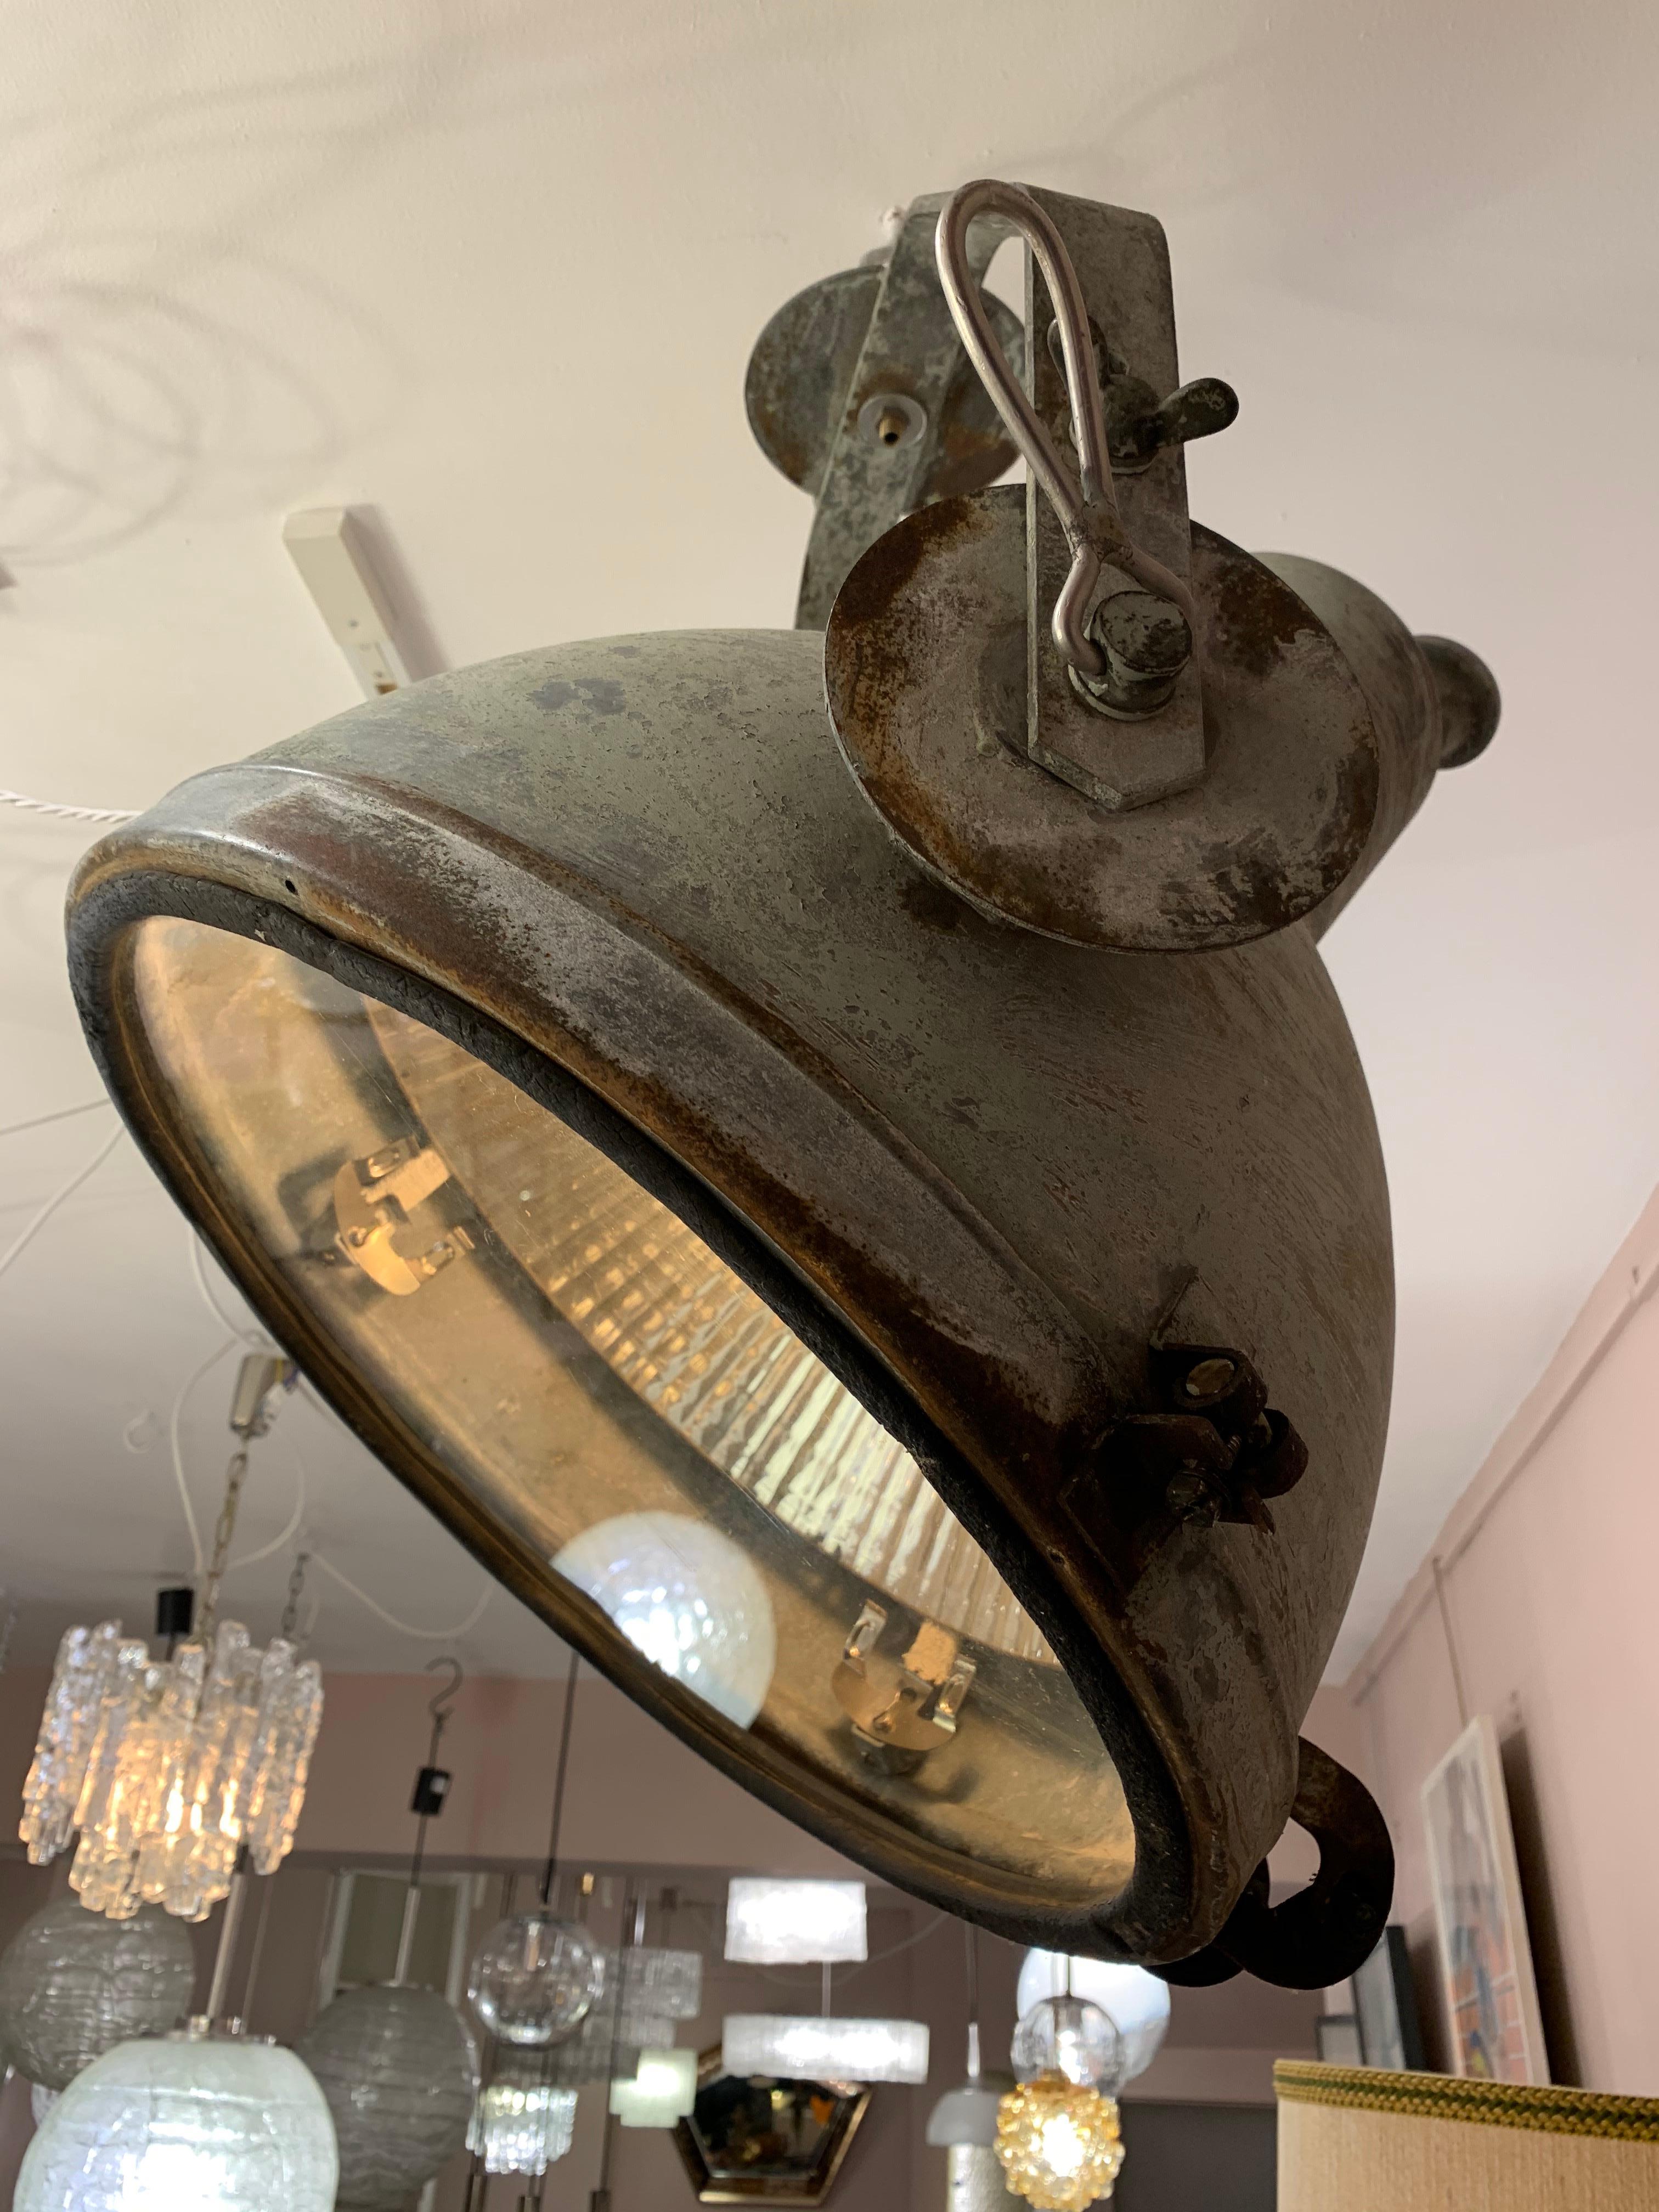 A large vintage industrial hanging factory lamp. The light hangs from a brass hook and swivels according to where you would like the light to be directed. The lamp has a beautiful aged patina and a matt grey/green finish. The single E27 screw in